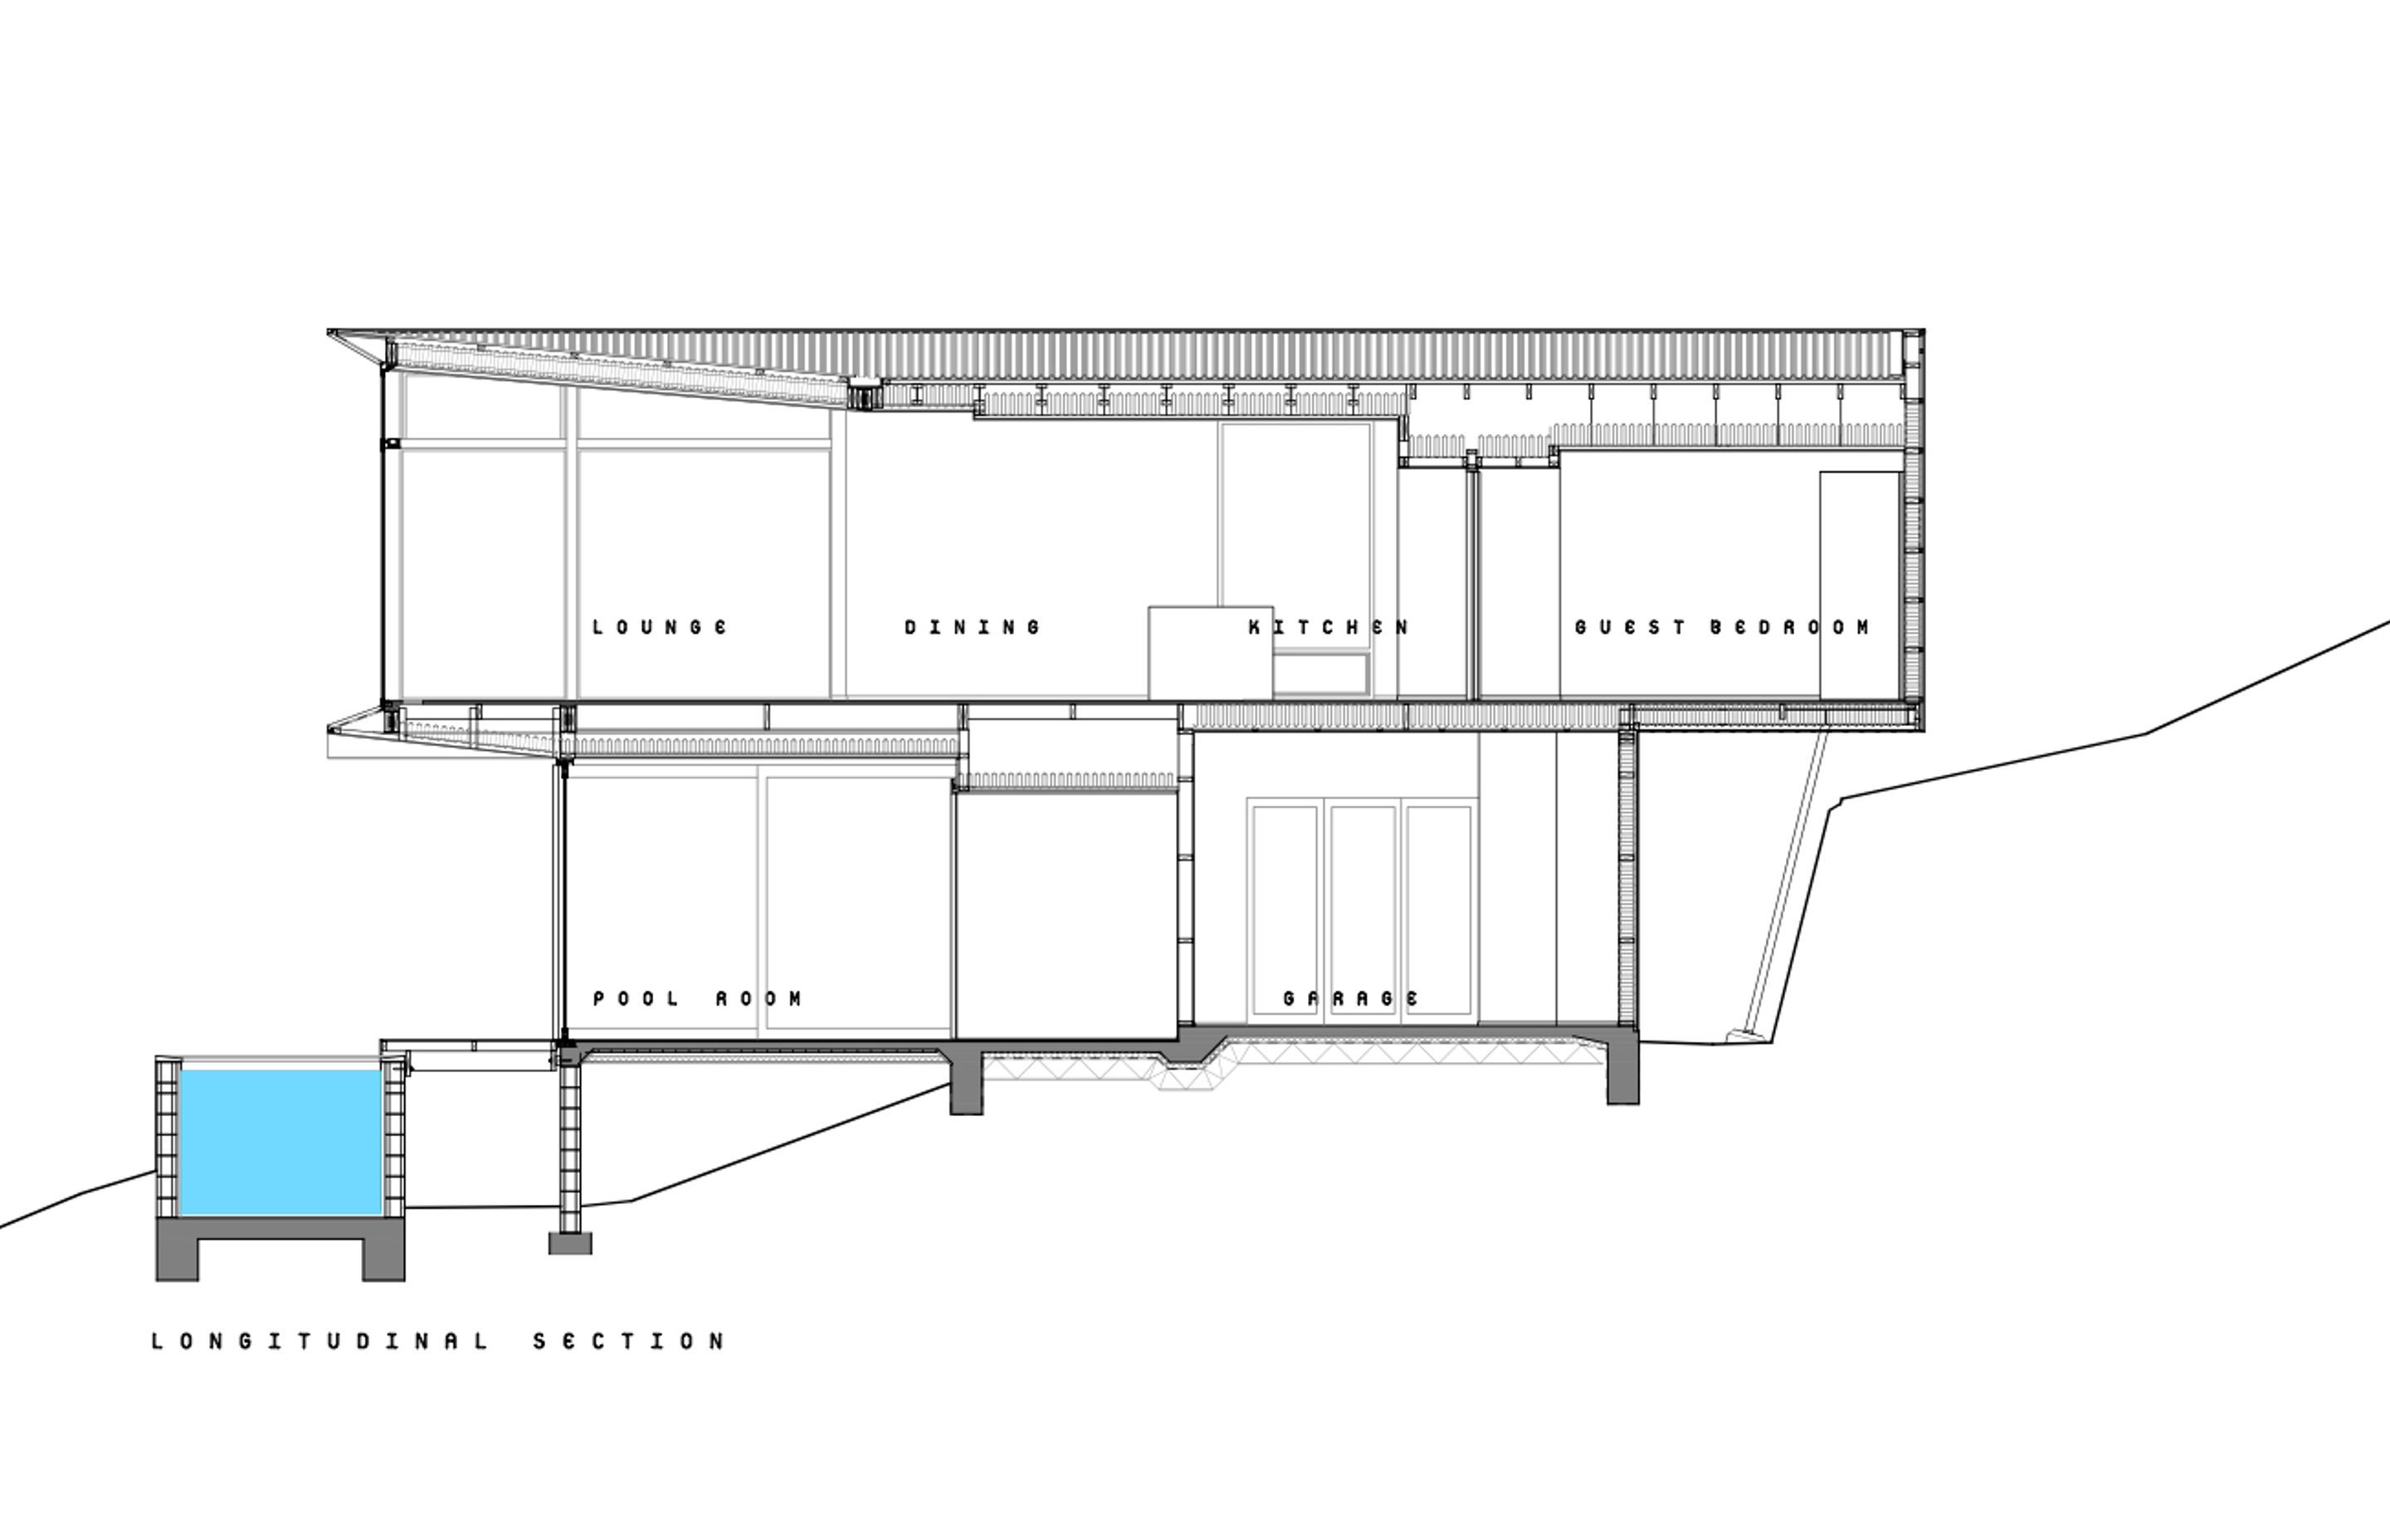 A longitudinal section by Objects. shows the swimming pool below the ground-floor area.